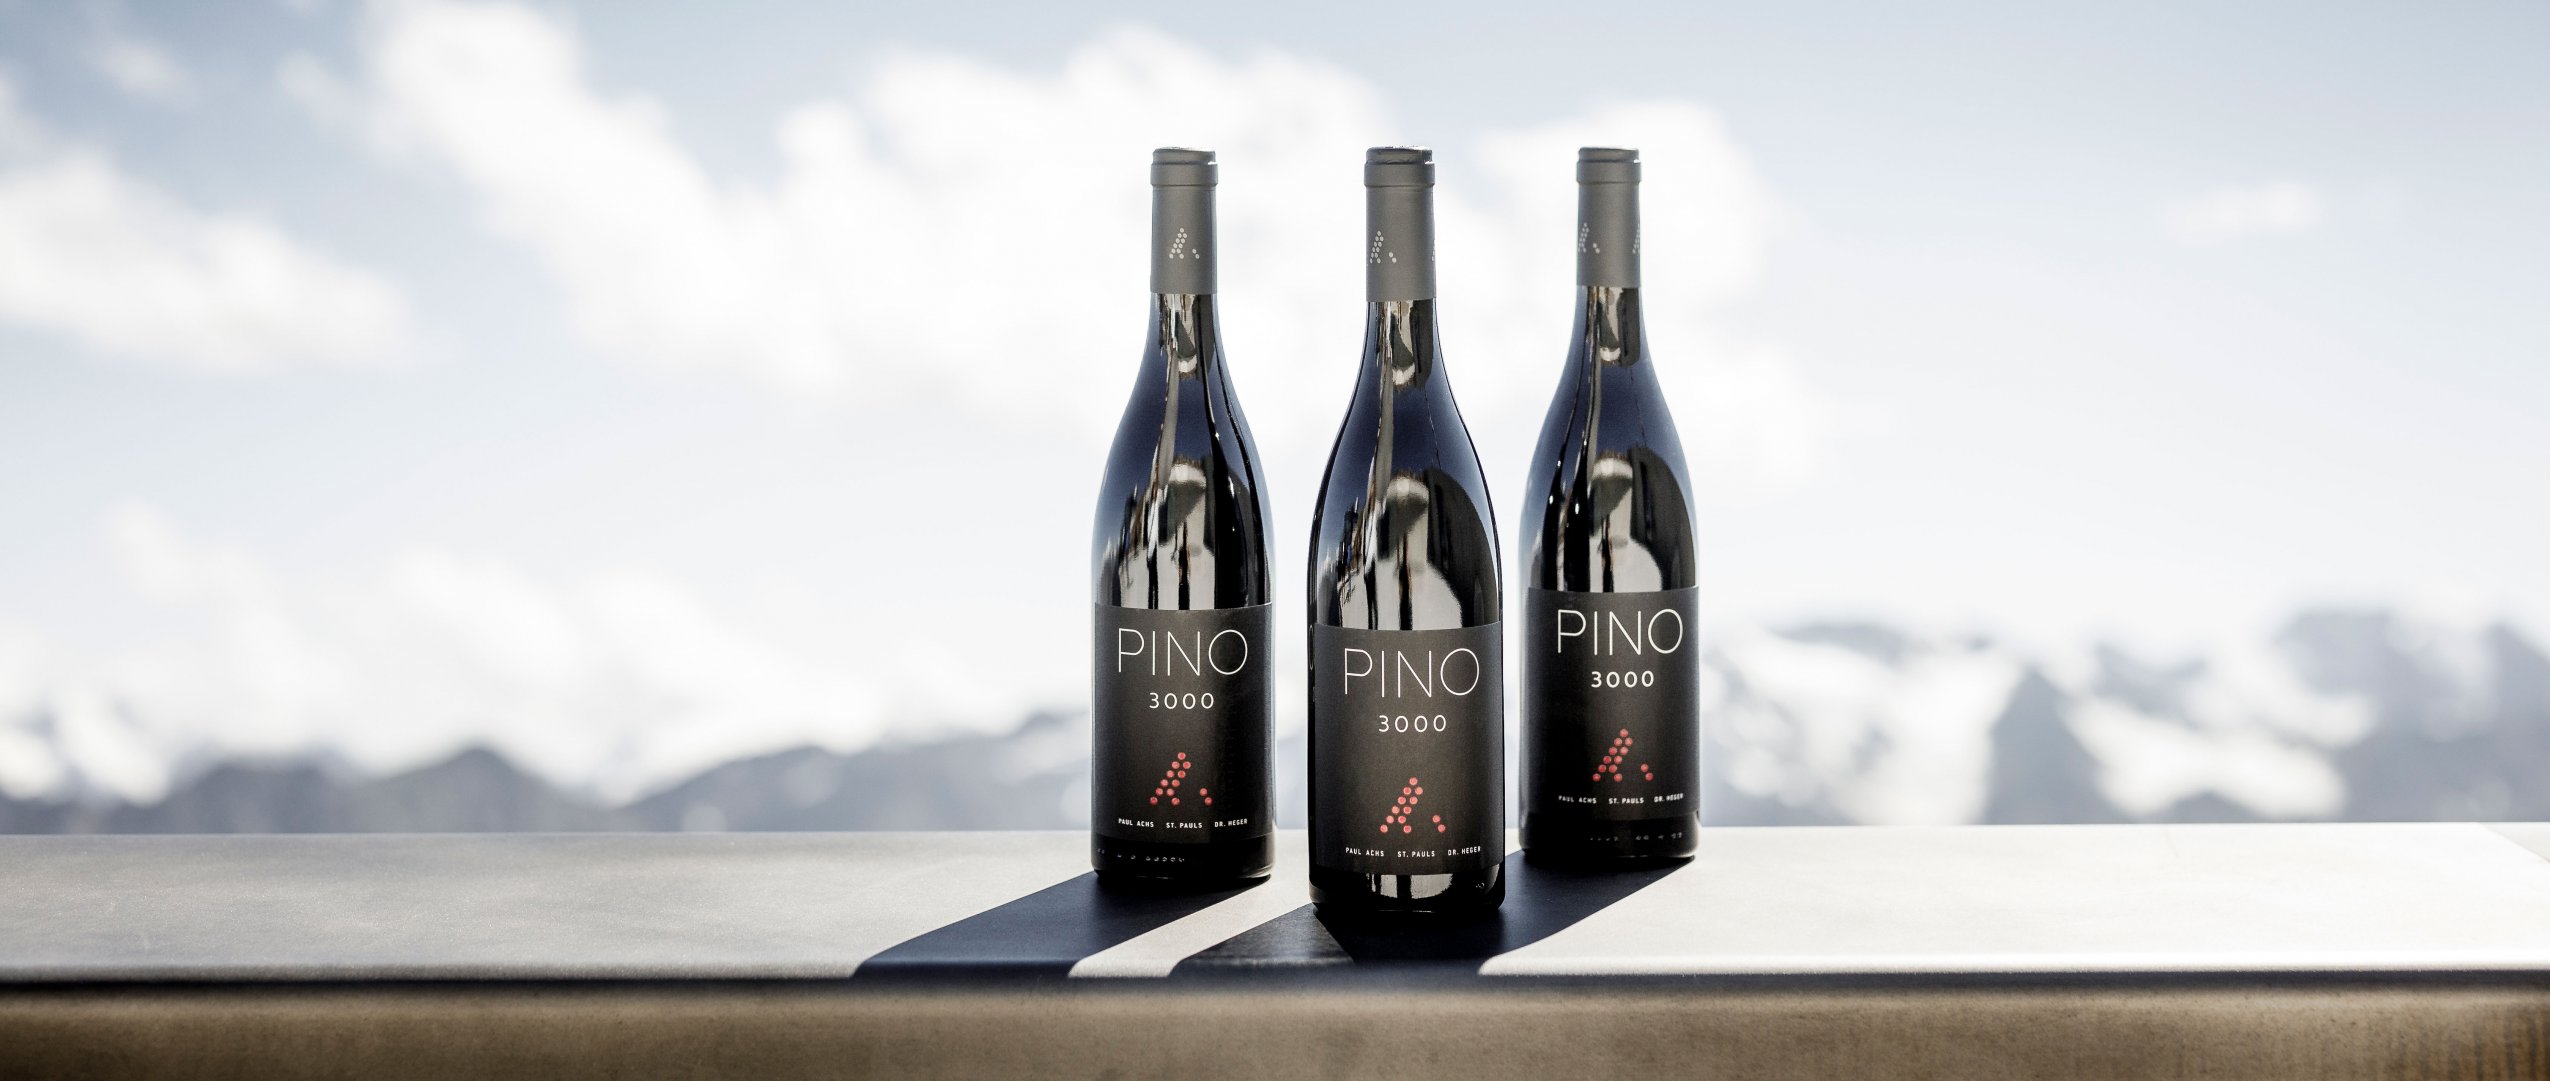 Video from the PINO 3000 wine